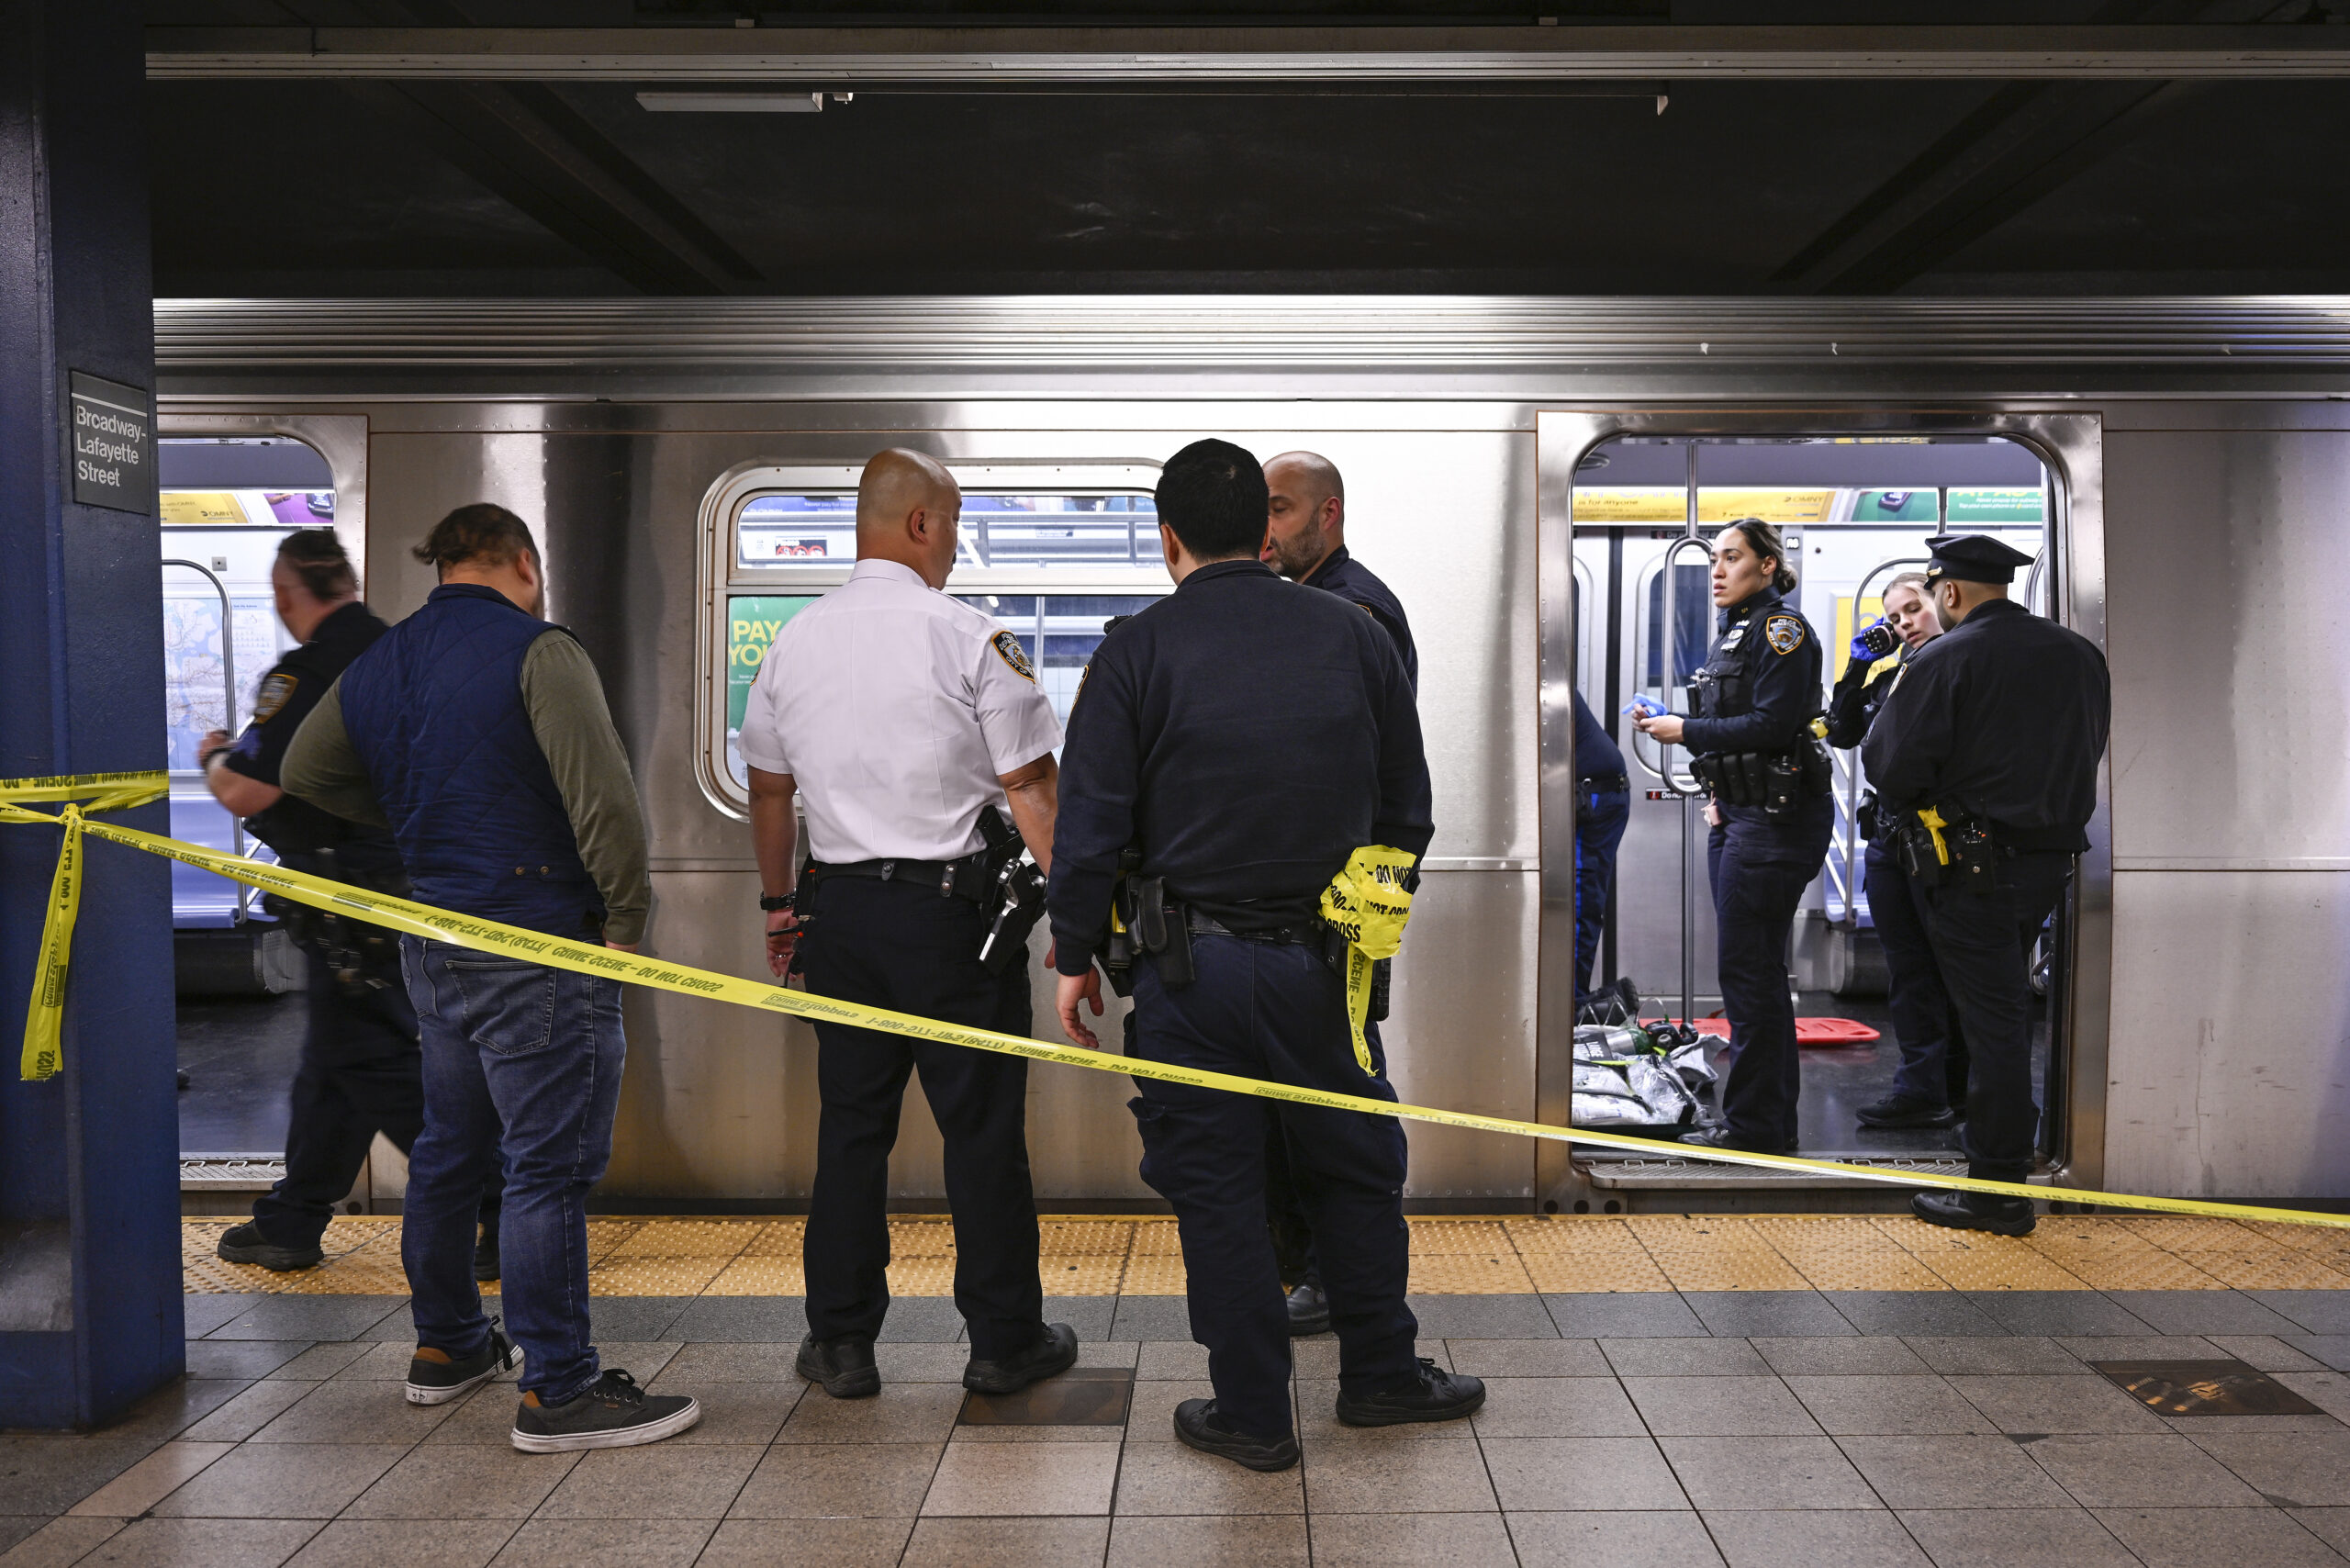 New York police officers respond to the scene where a fight was reported on a subway train on Monday, May 1, 2023, in New York. A man suffering an apparent mental health episode aboard a subway died on Monday after being placed in a headlock by a fellow rider, according to police officials and video of the encounter. Jordan Neely, 30, was shouting and pacing aboard a train in Manhattan, witnesses and police said, when he was taken to the floor by another passenger. Photo credit: Paul Martinka, The Associated Press